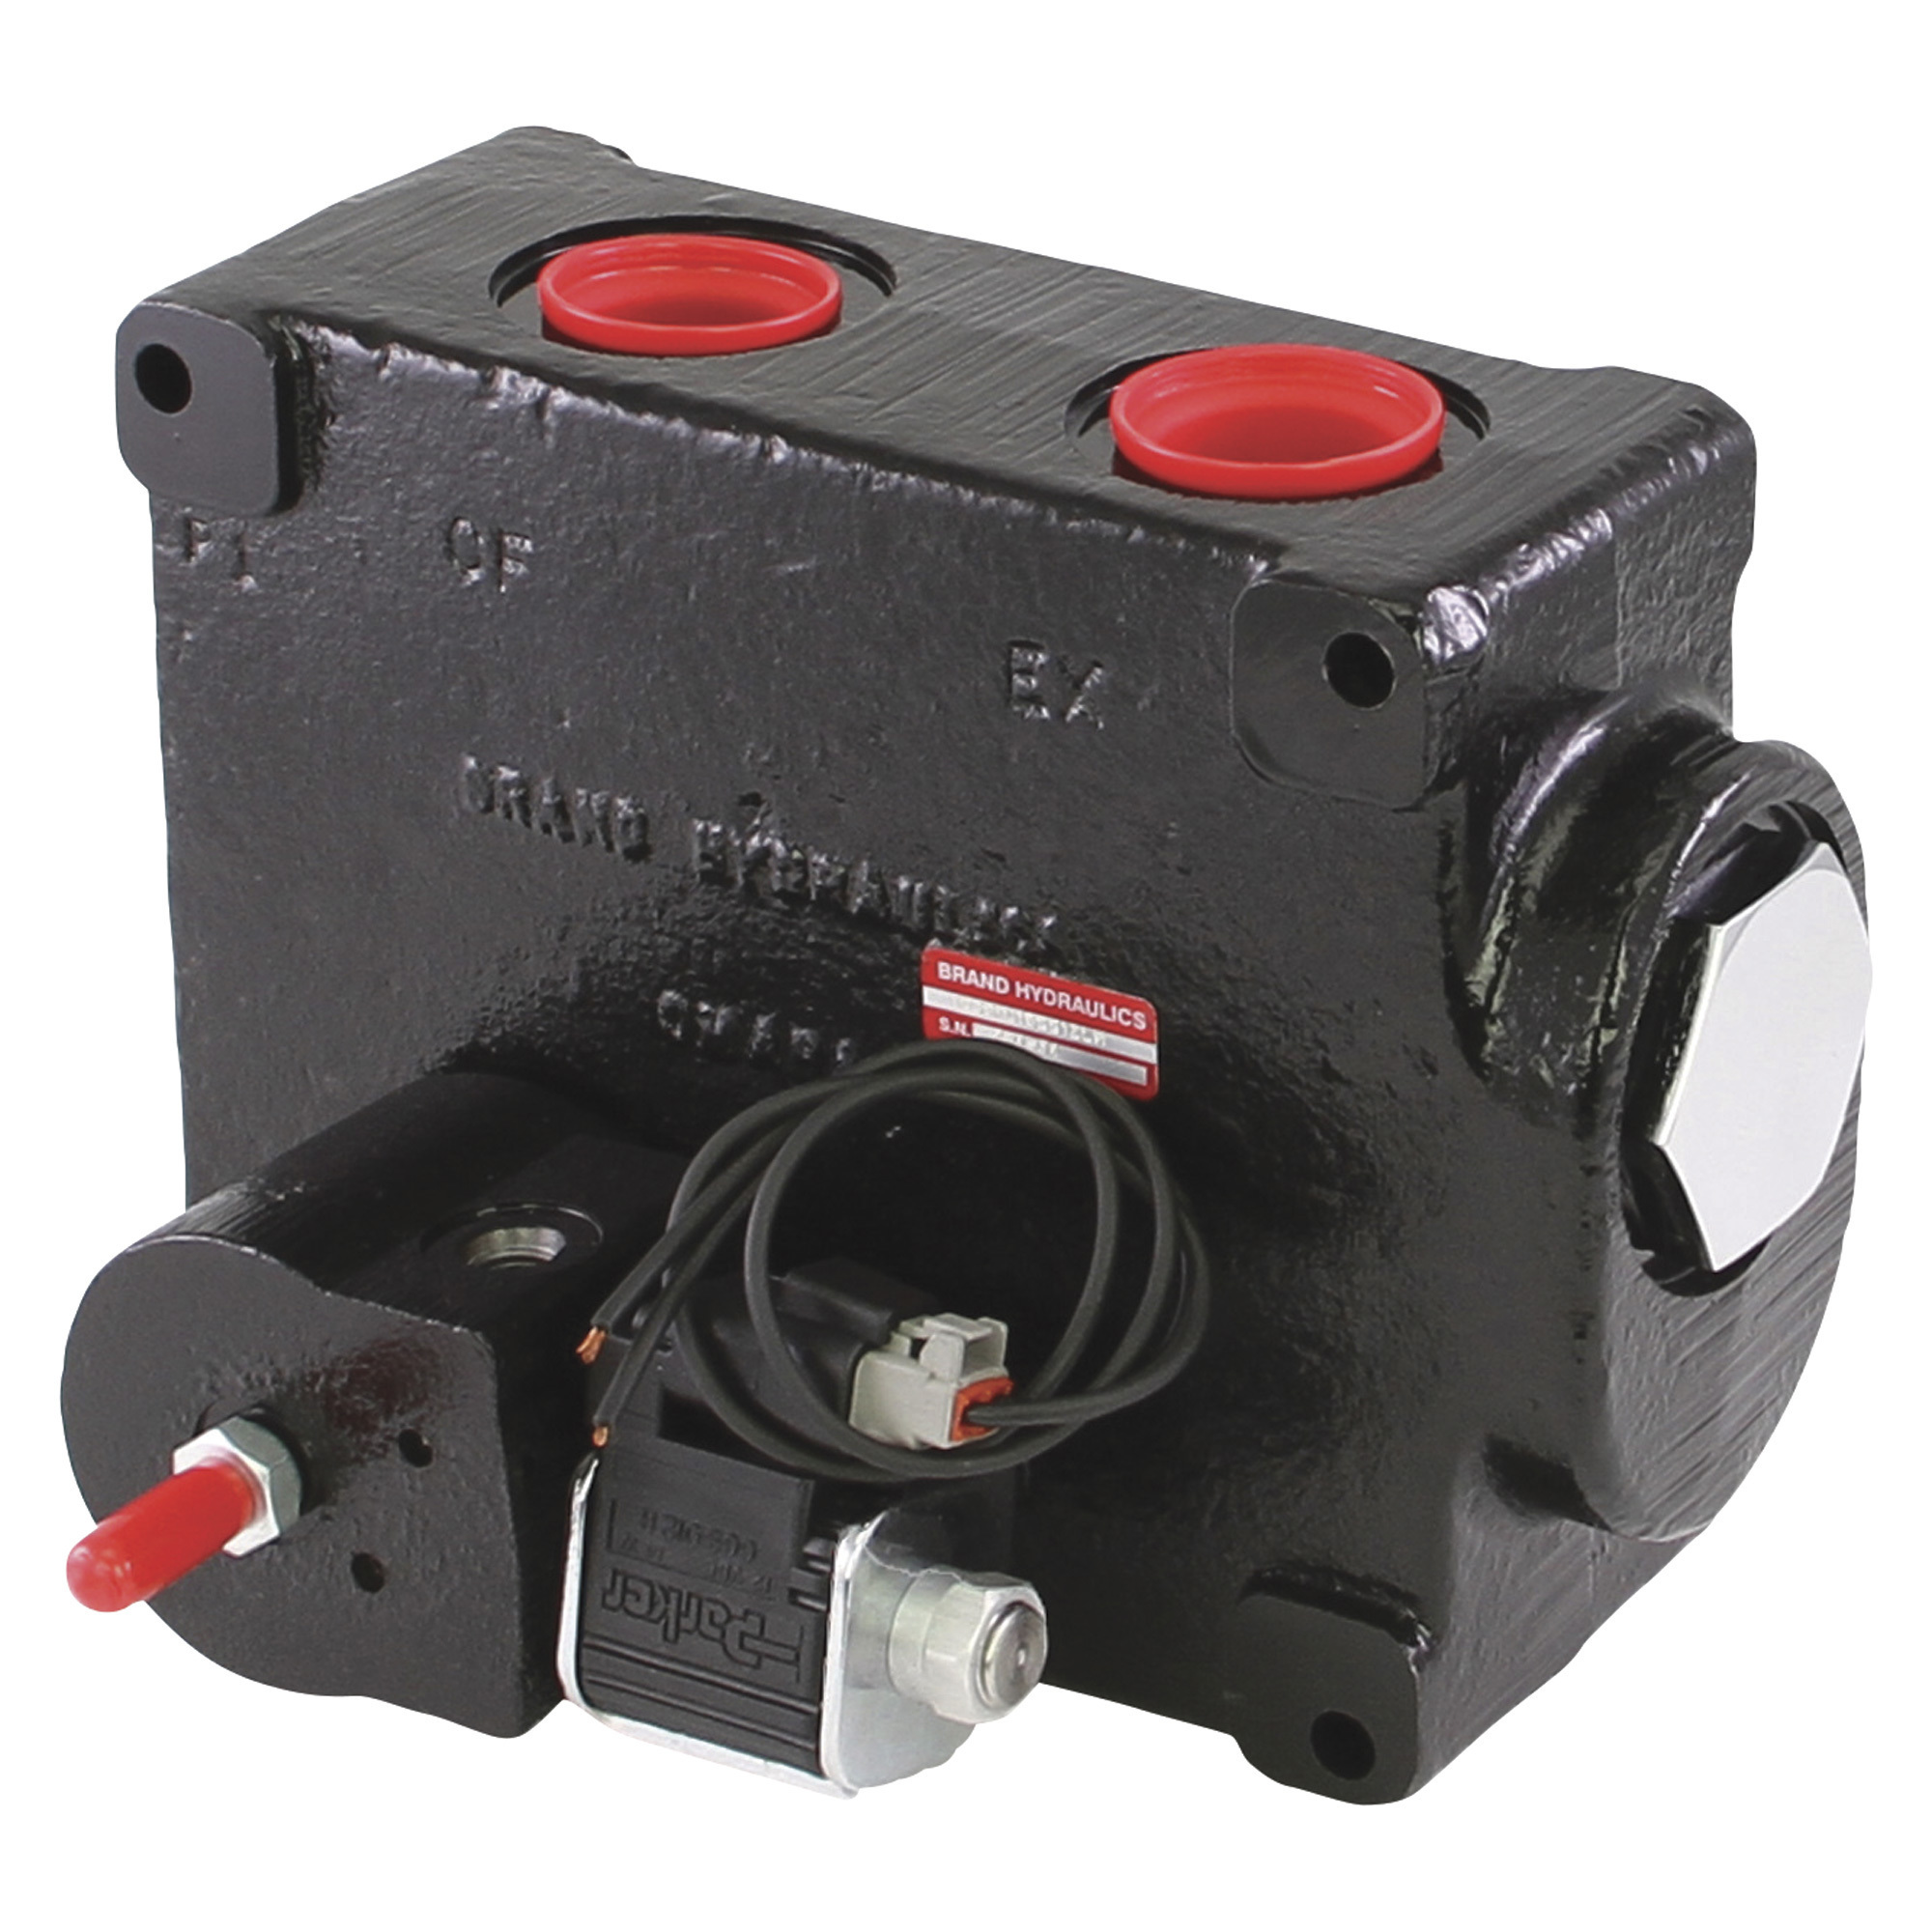 Brand Hydraulics Electronically Adjustable Flow Control Valve - 0-55 GPM,  3,000 PSI, Model# PLEFC165512LM